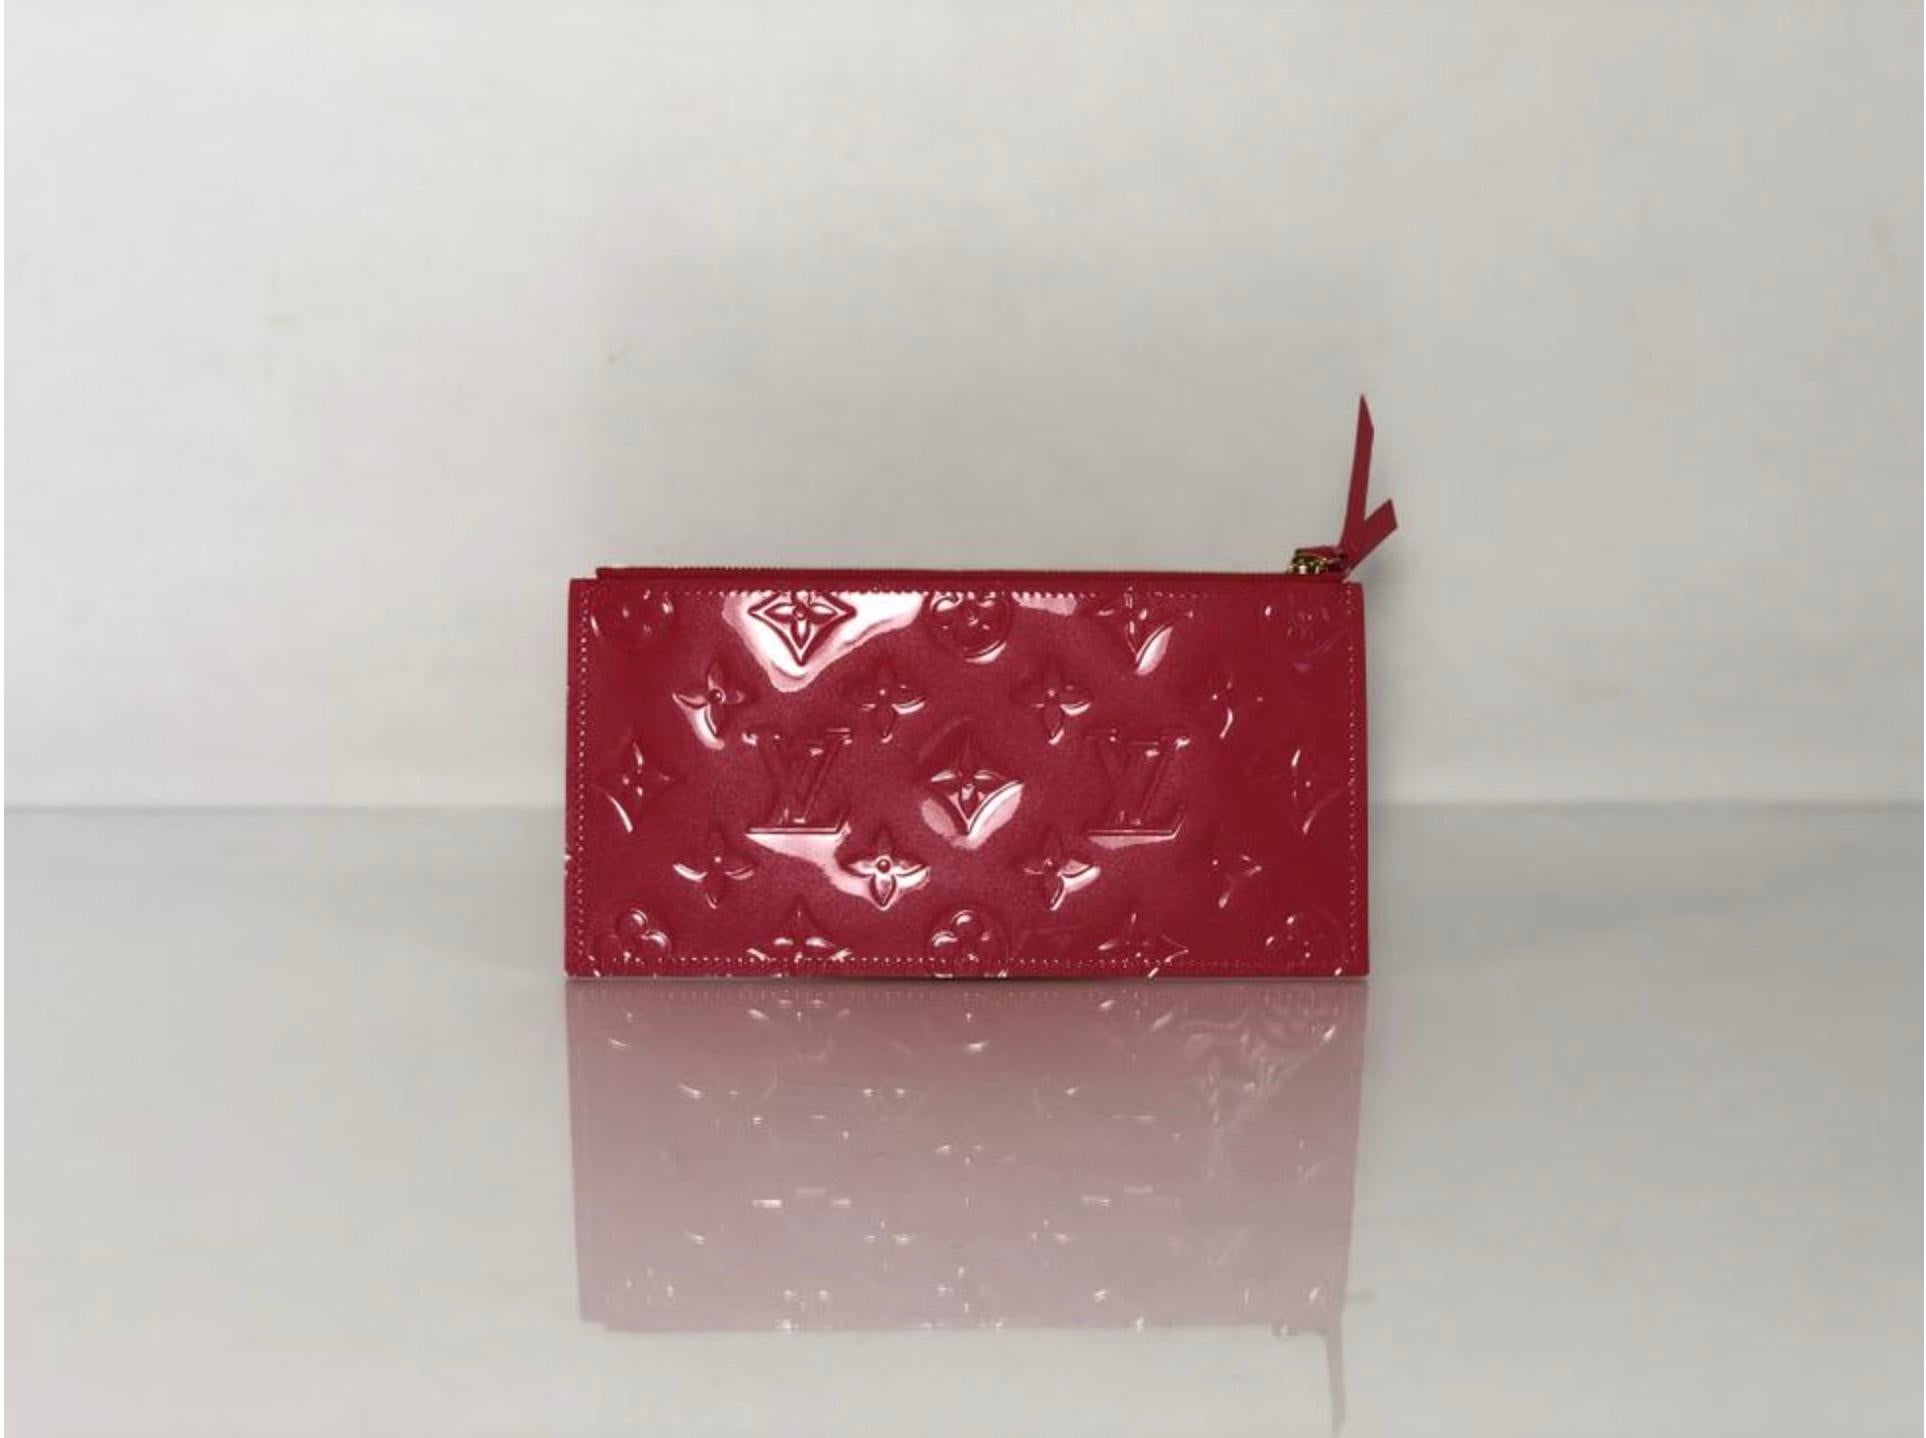 MODEL - Louis Vuitton Vernis Pochette Felicie Clutch Insert

CONDITION - Exceptional! No signs of wear.

SKU - 2965

ORIGINAL/CURRENT RETAIL PRICE - 425 + tax

DATE/SERIAL CODE - NA

ORIGIN - France

PRODUCTION - Unknown

DIMENSIONS - L8.4 x H4.5 x